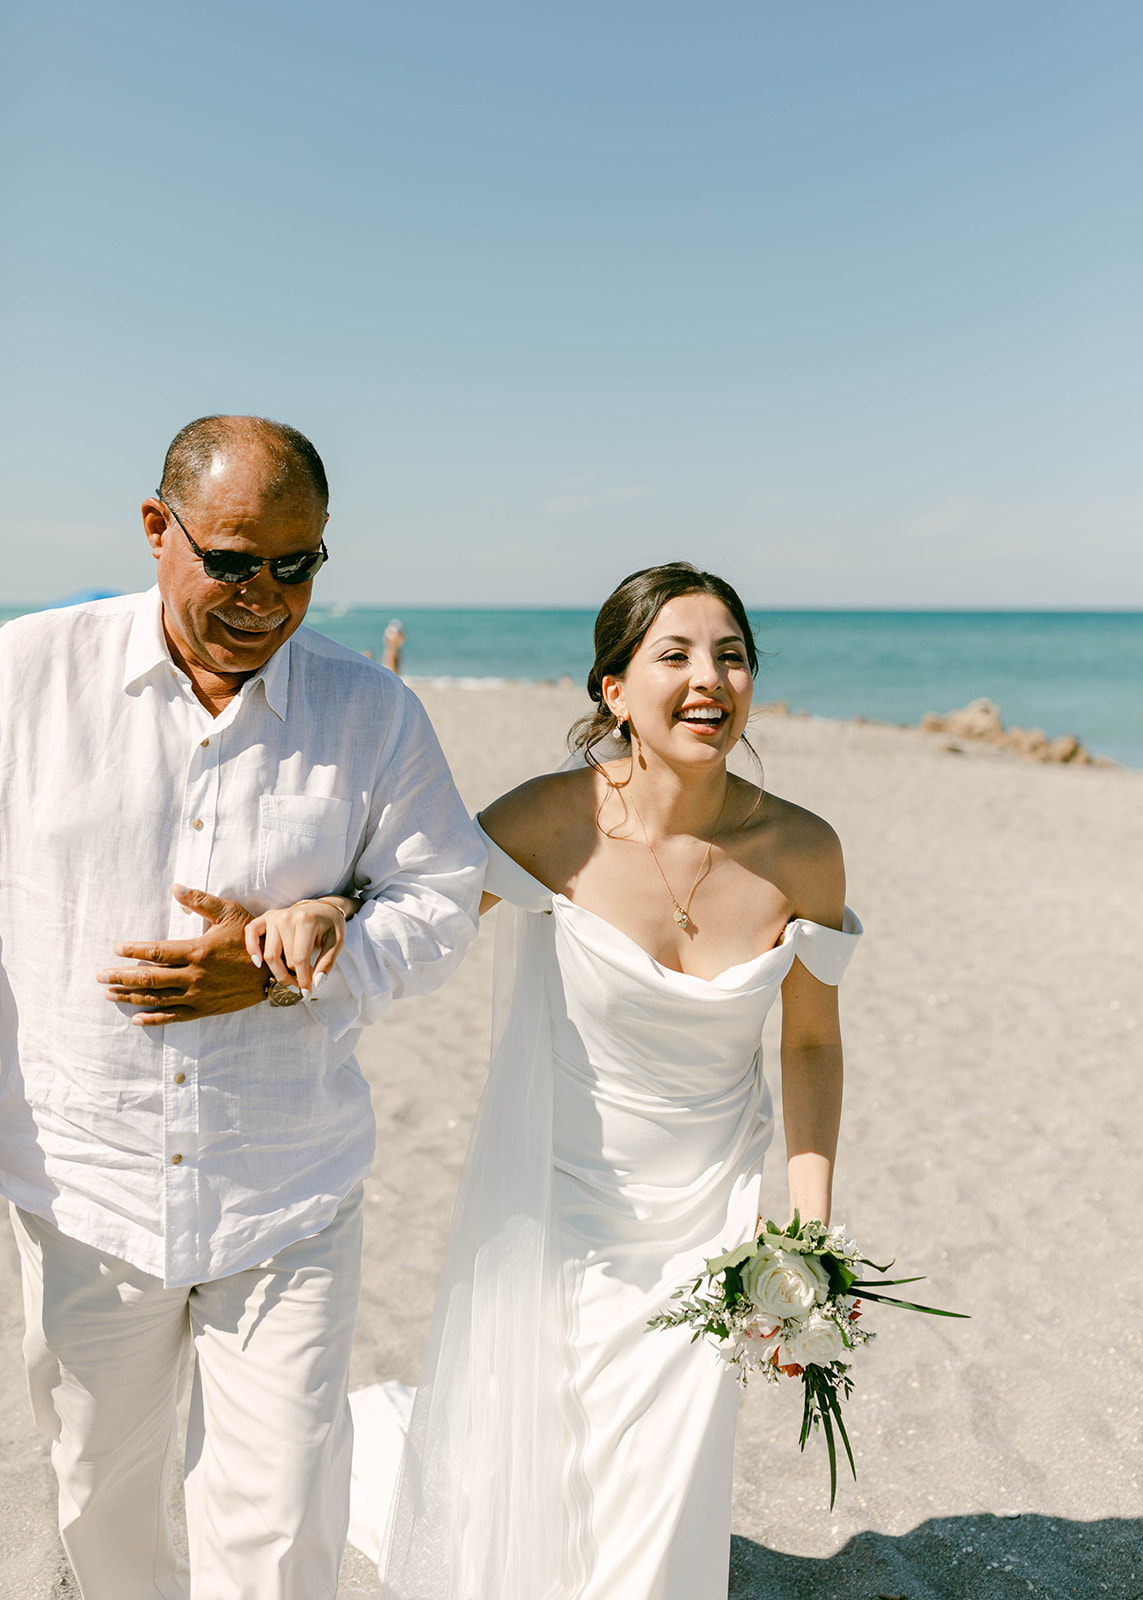 Father of the bride walks Bride down the aisle at beach ceremony in Palm Beach, Florida